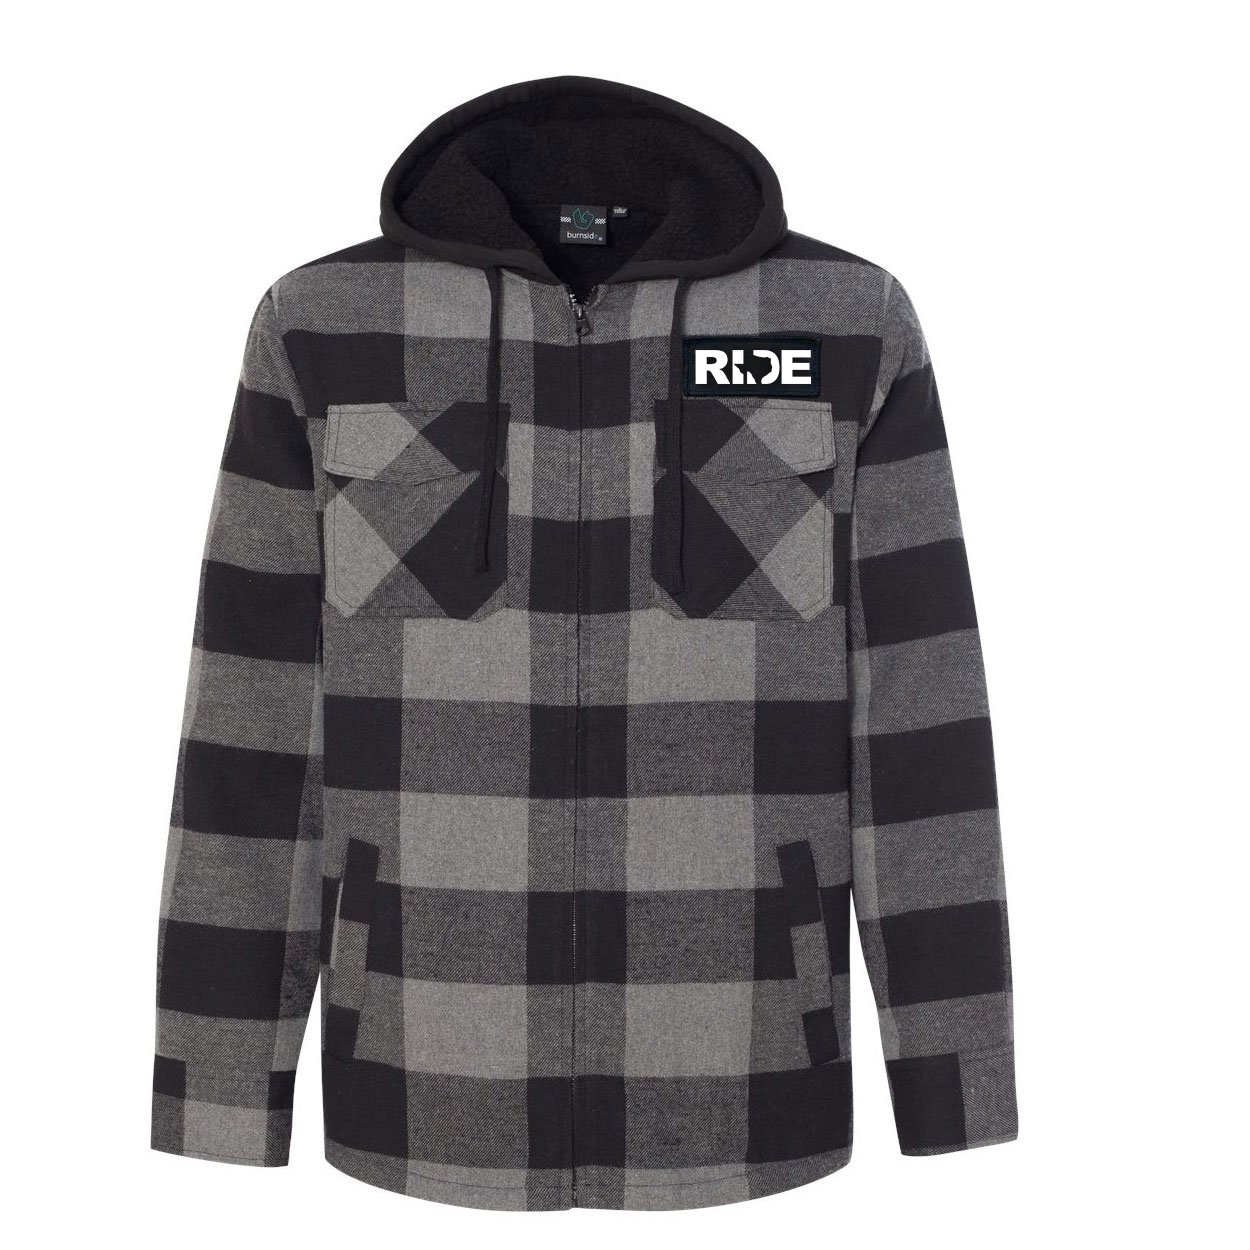 Ride Texas Classic Unisex Full Zip Woven Patch Hooded Flannel Jacket Black/Gray (White Logo)